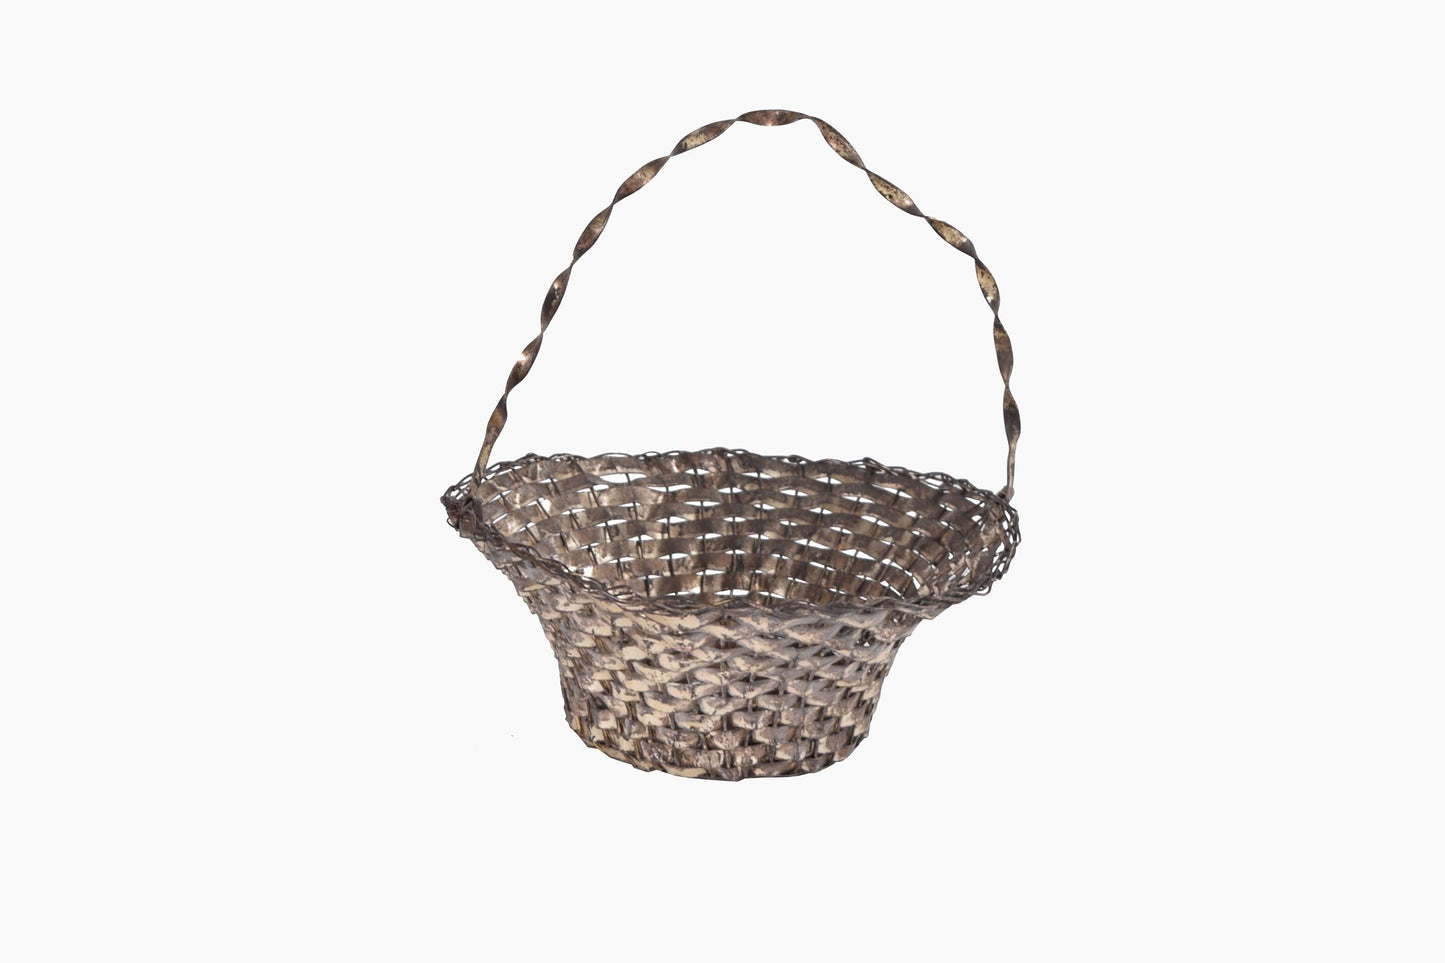 Silver plated woven metal basket